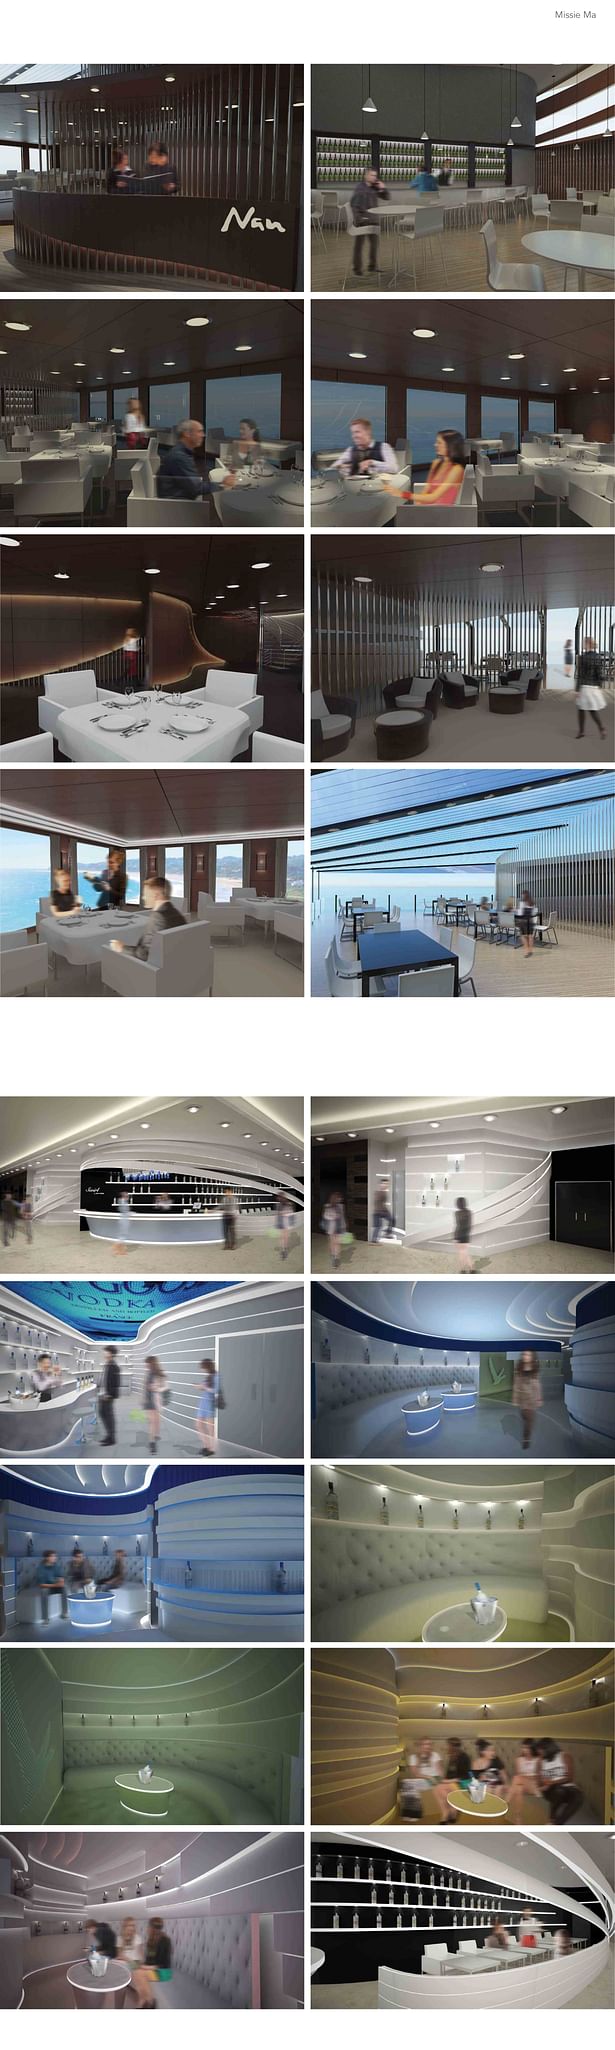 Restaurant Project + Lounge Project Renderings